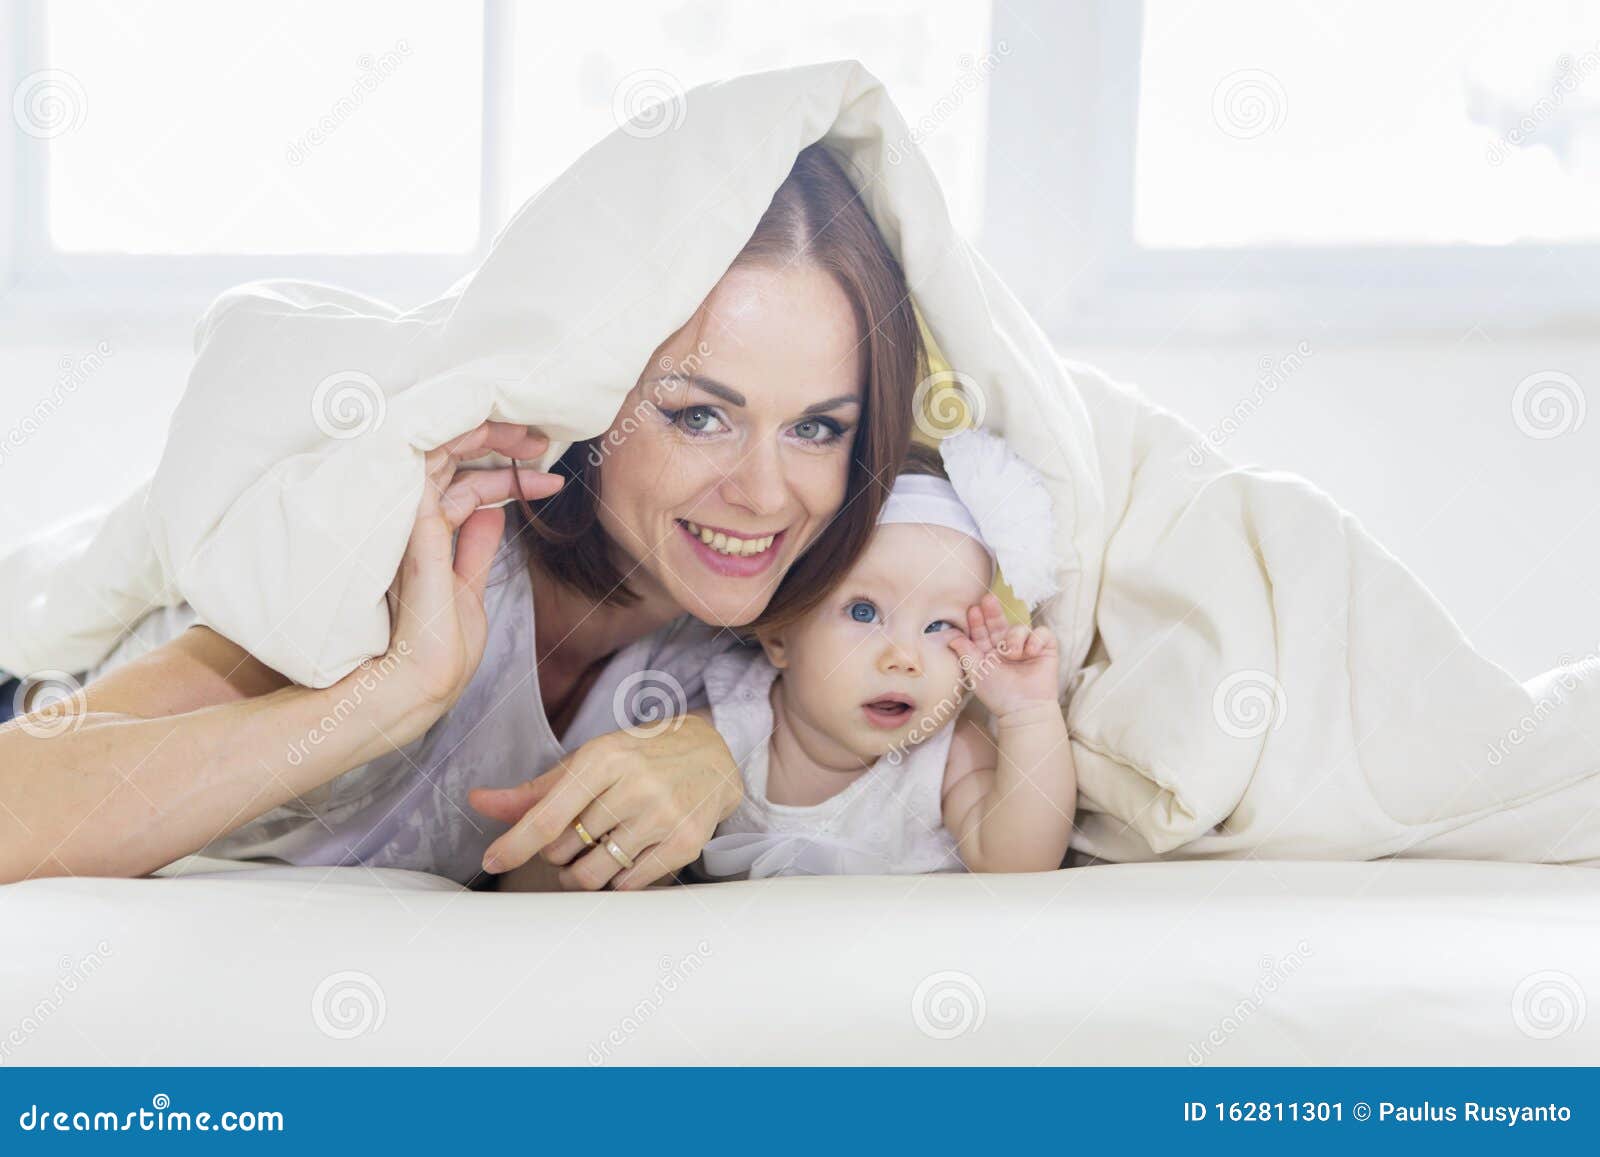 Happy Woman and Her Baby Under a Blanket Stock Image - Image of eyes ...